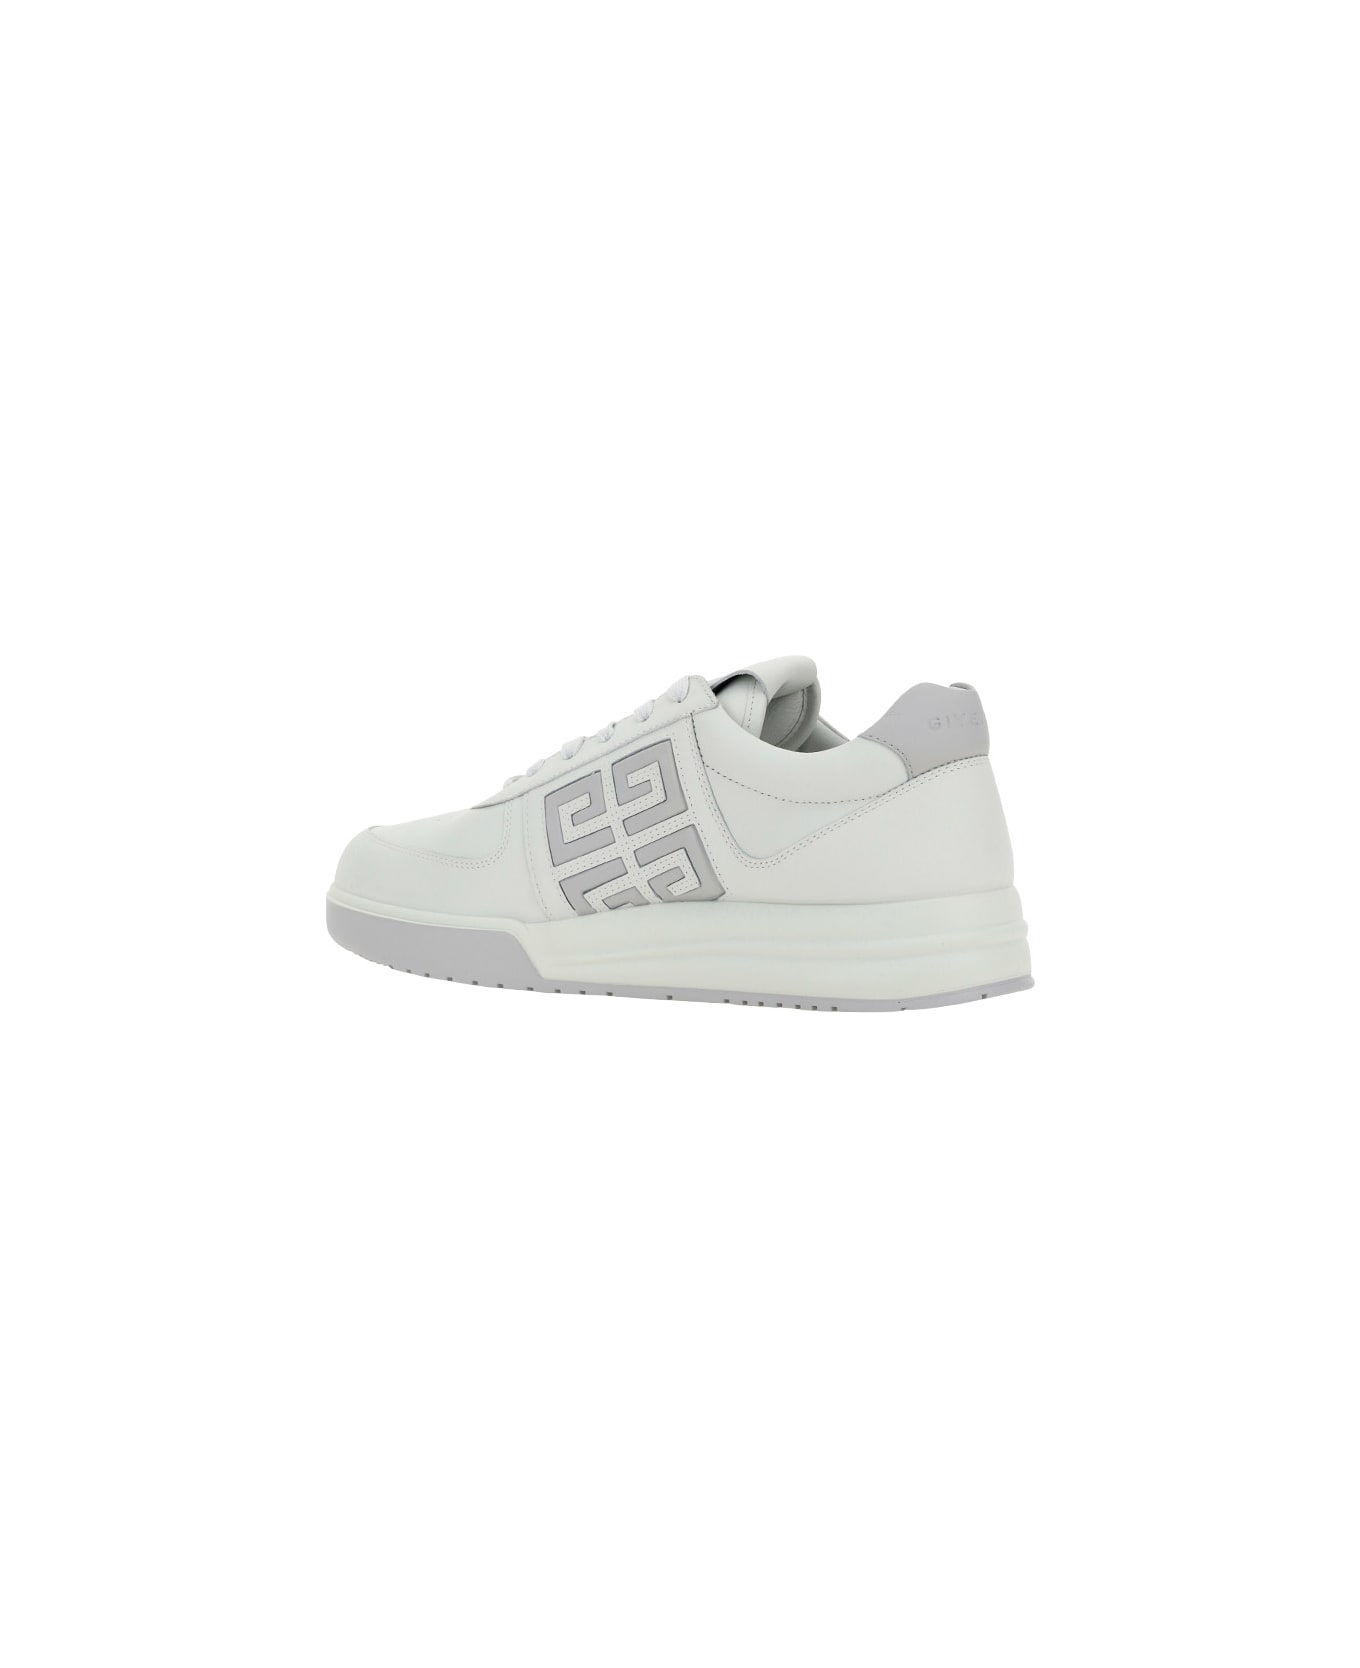 Givenchy 'g4' Sneakers - White/grey スニーカー